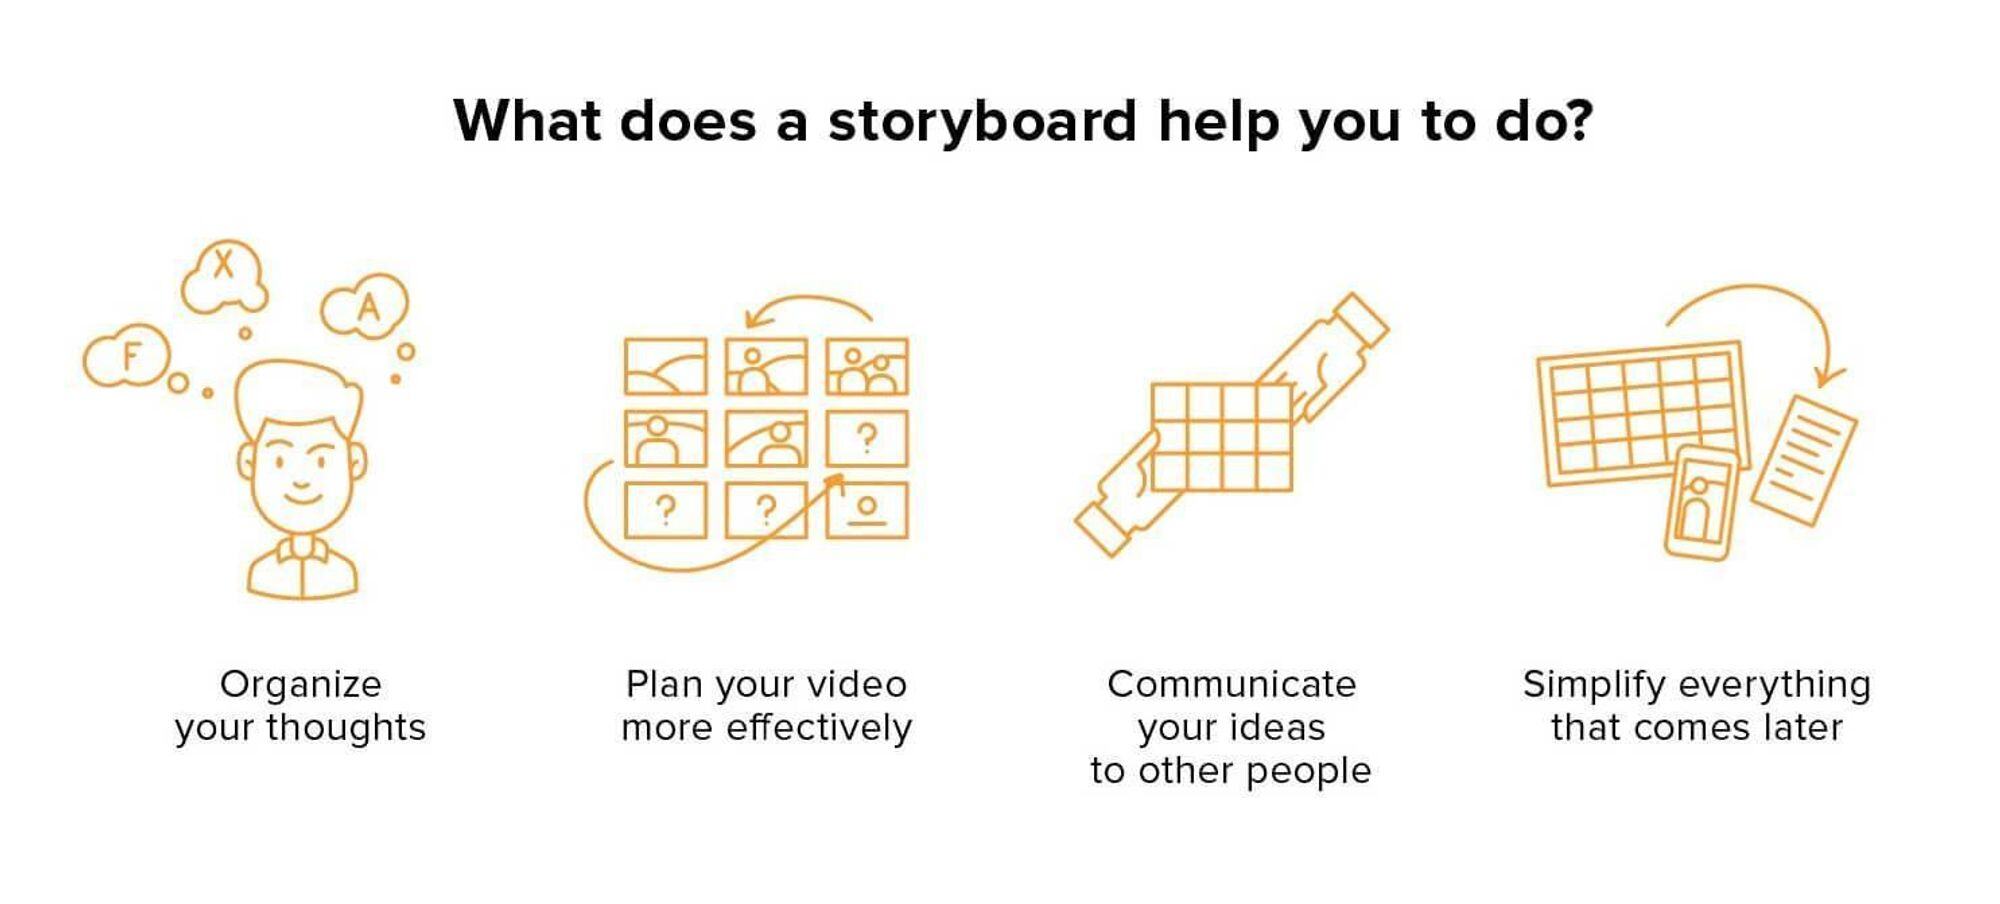 Four benefits of creating a storyboard